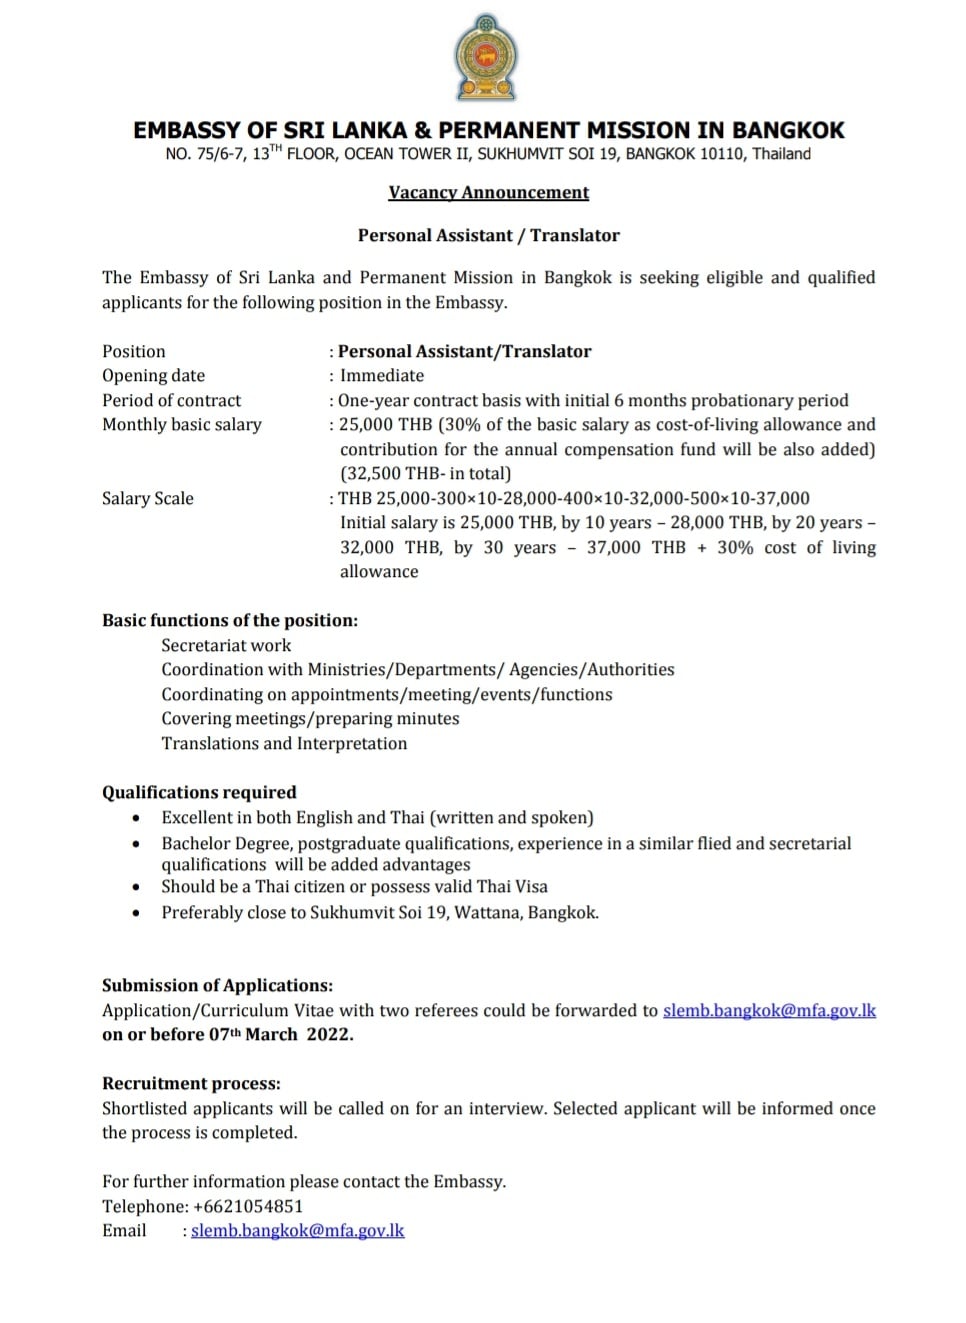 The Embassy and Permanent Mission of Sri Lanka in Bangkok is seeking eligible and qualified applicants for the post of Personal Assistant/Translator